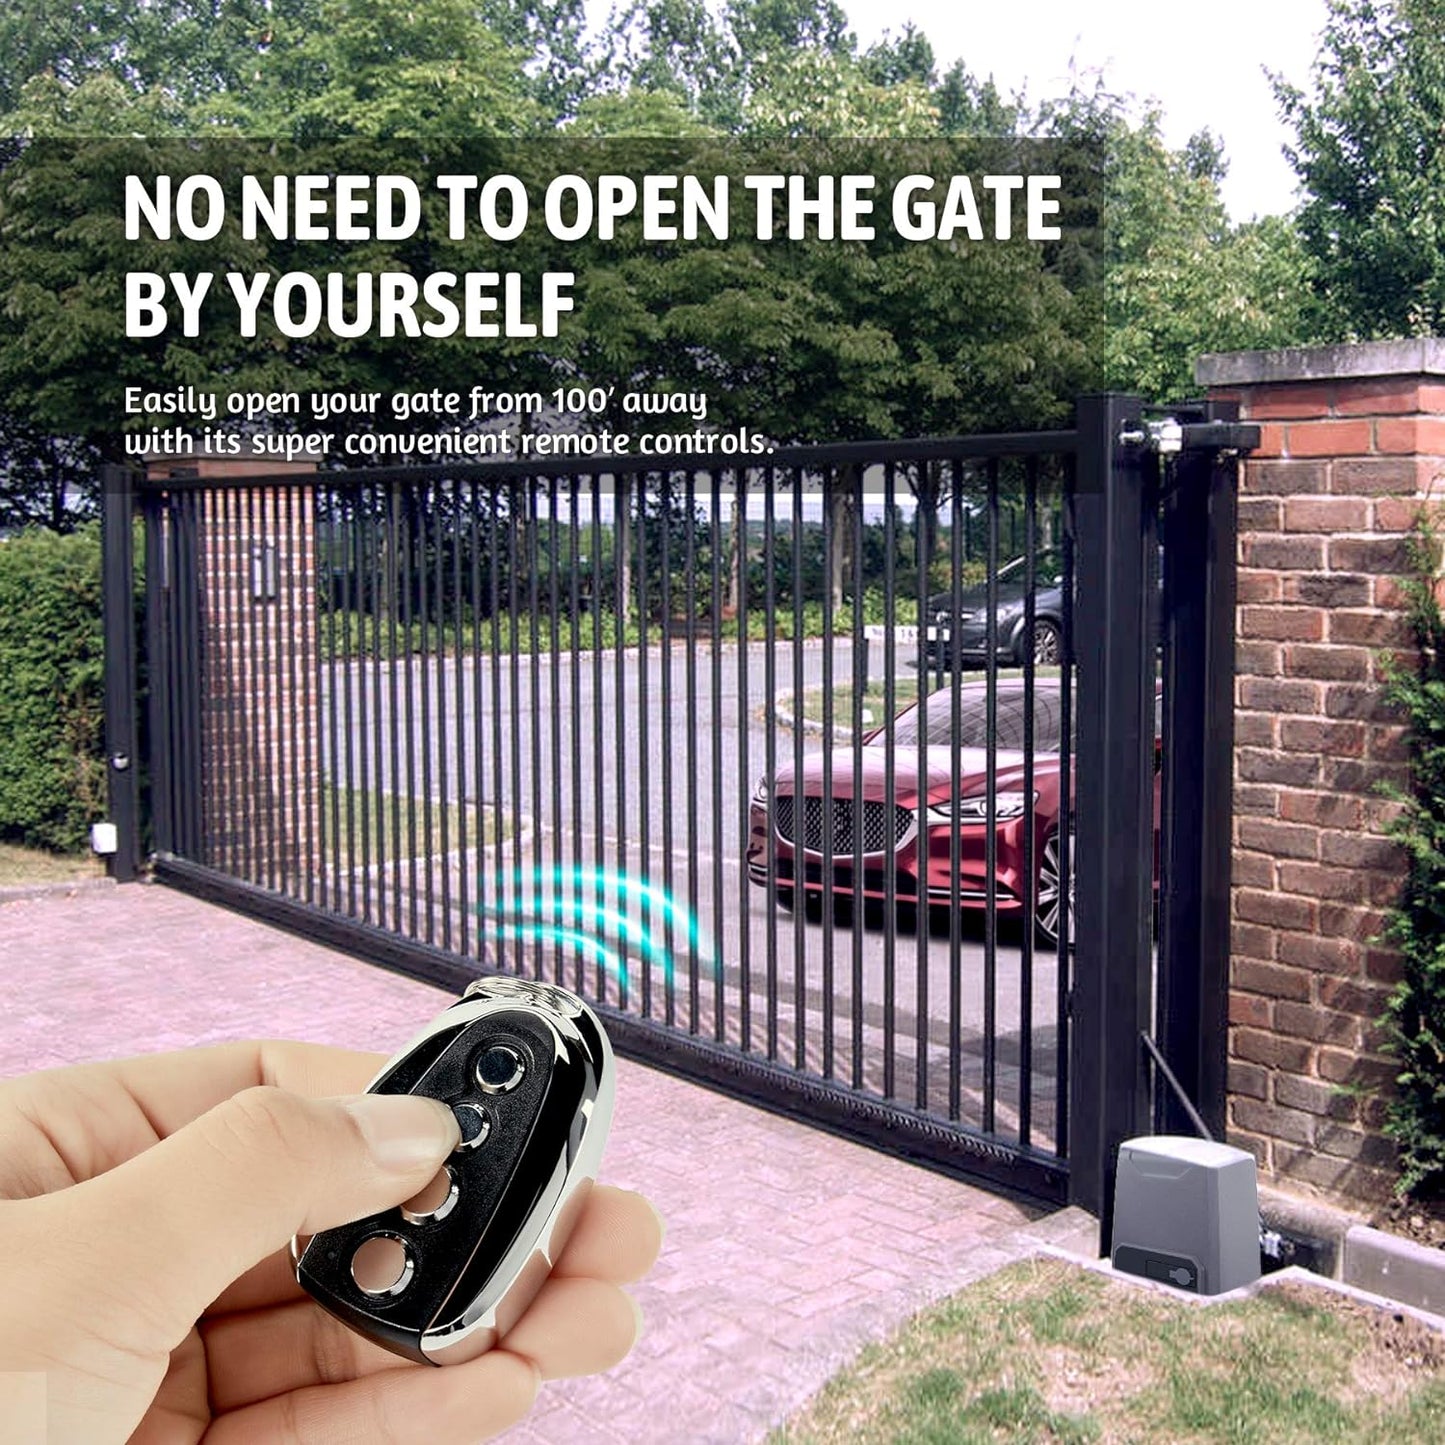 Complete Gate Operator Hardware Security System Kit for Sliding 3300lbsGates Up to 40 Feet, Automatic with Two Remote Controls, Electric Rolling Driveway Slide Gate Motor